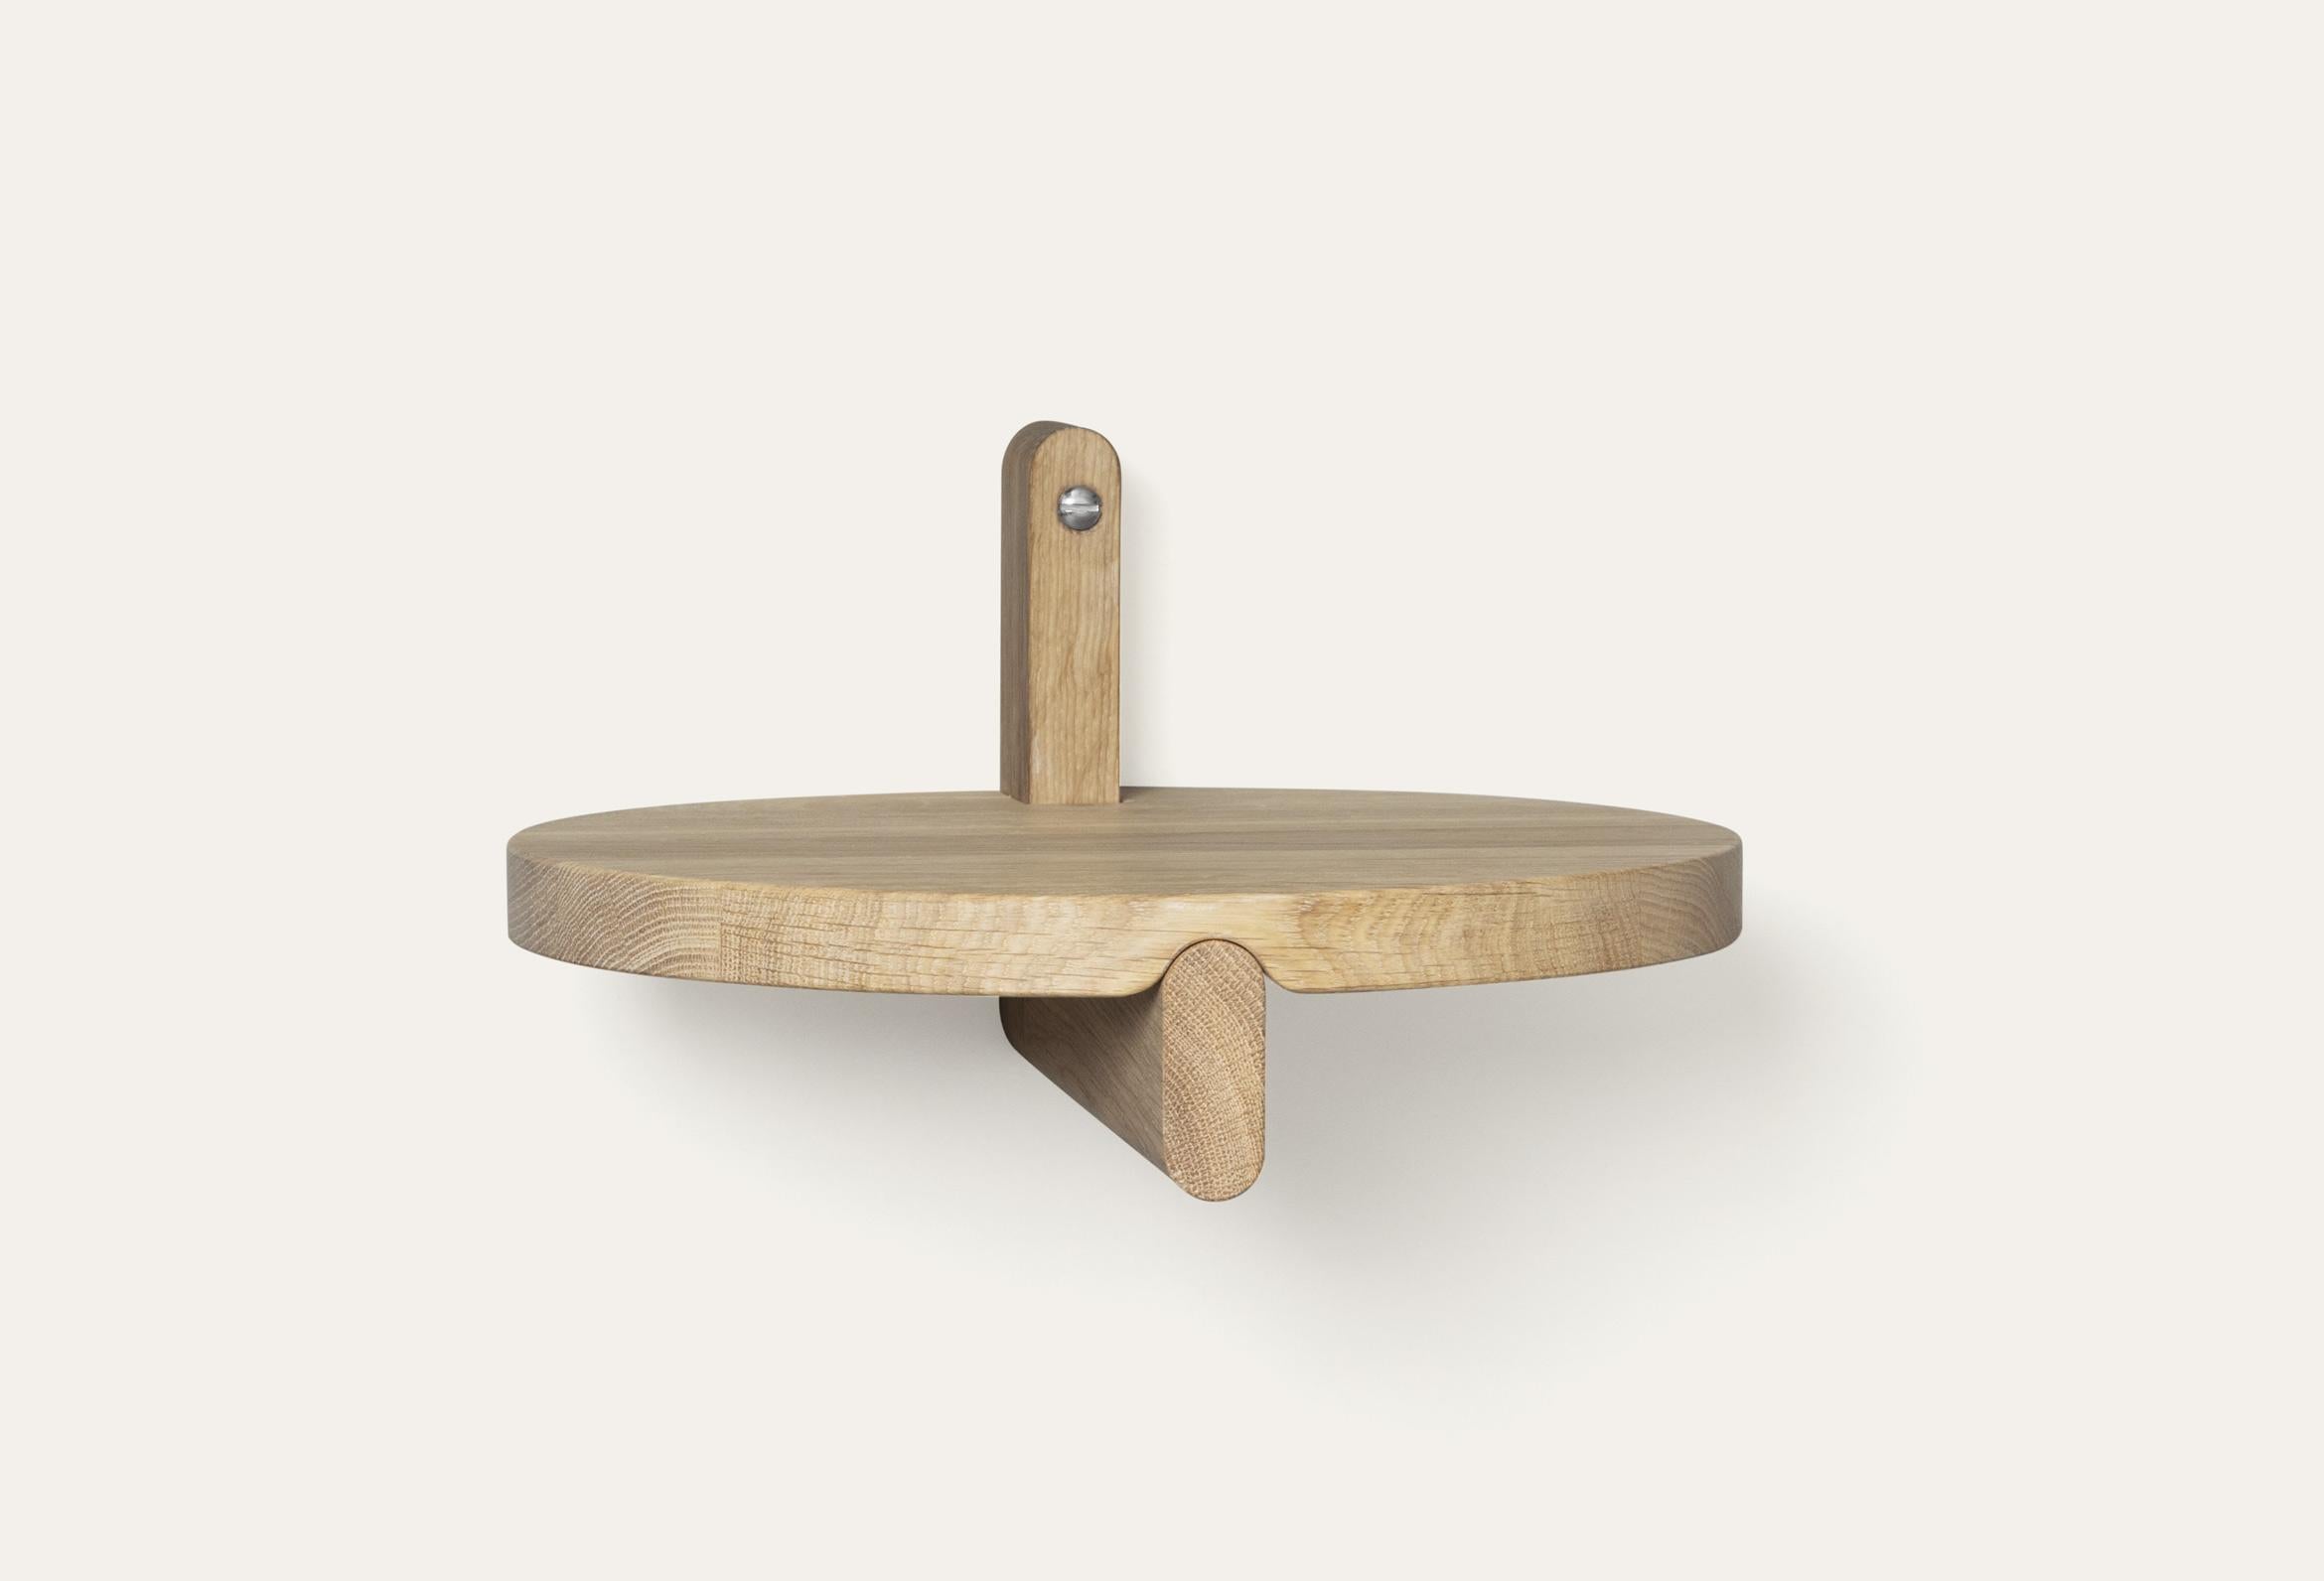 Natural Rondelle round shelf by Storängen Design
Dimensions: D 25 x H 14 cm
Materials: oak wood.
Available in other colors and with or without steel hanger.

Rondelle can be a shelf or a small table depending on your needs. It shares the same